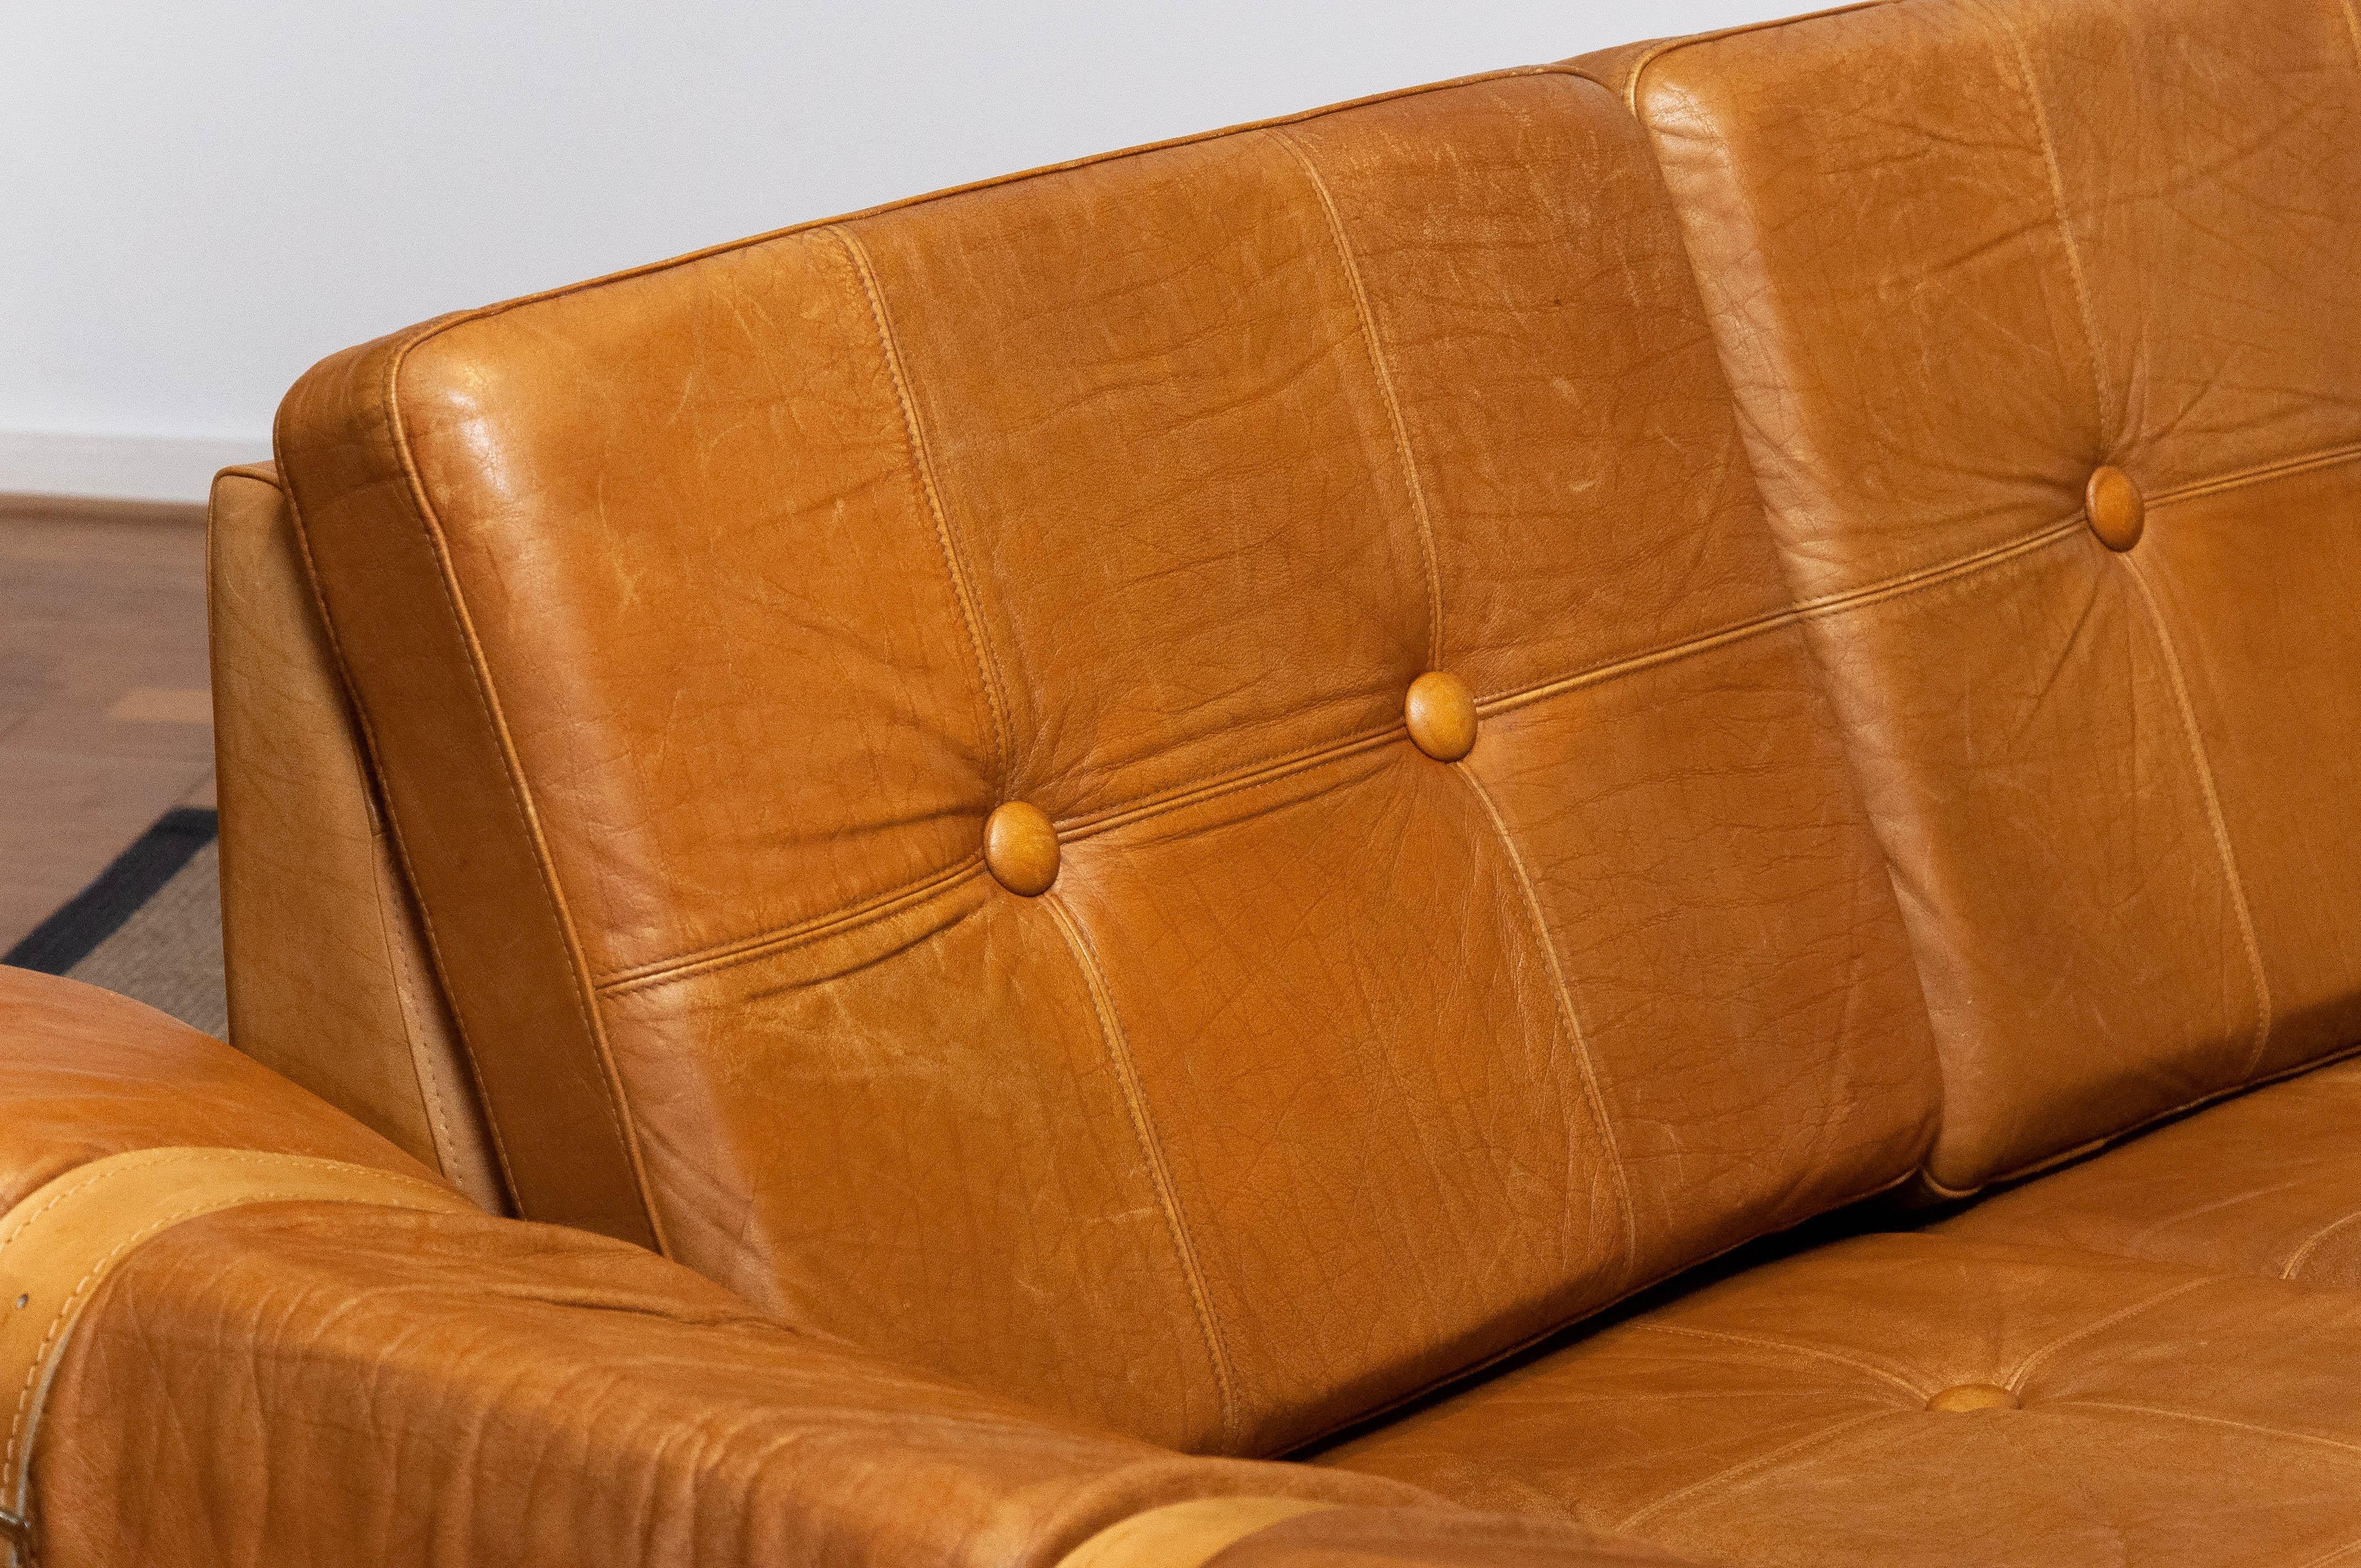 1970s Scandinavian Brutalist Three-Seater Low-Back Sofa in Camel Colored Leather For Sale 2